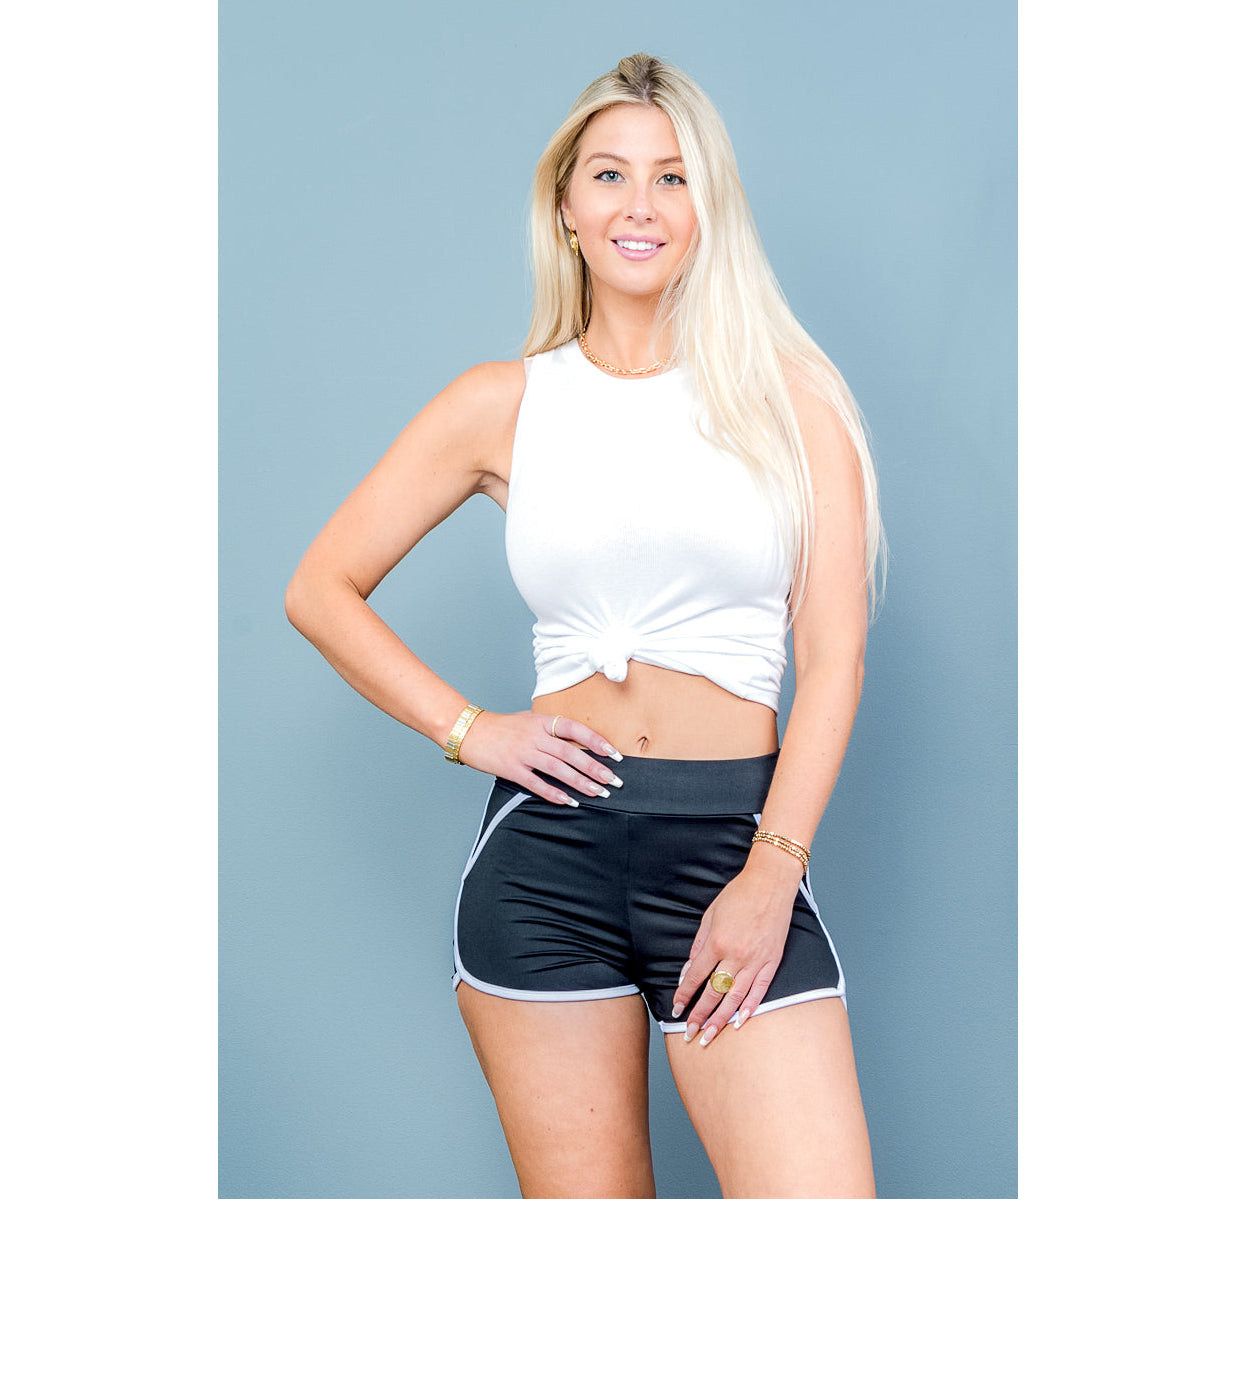 Sexy Running Shorts in Black or Mauve in Size S, M, or L